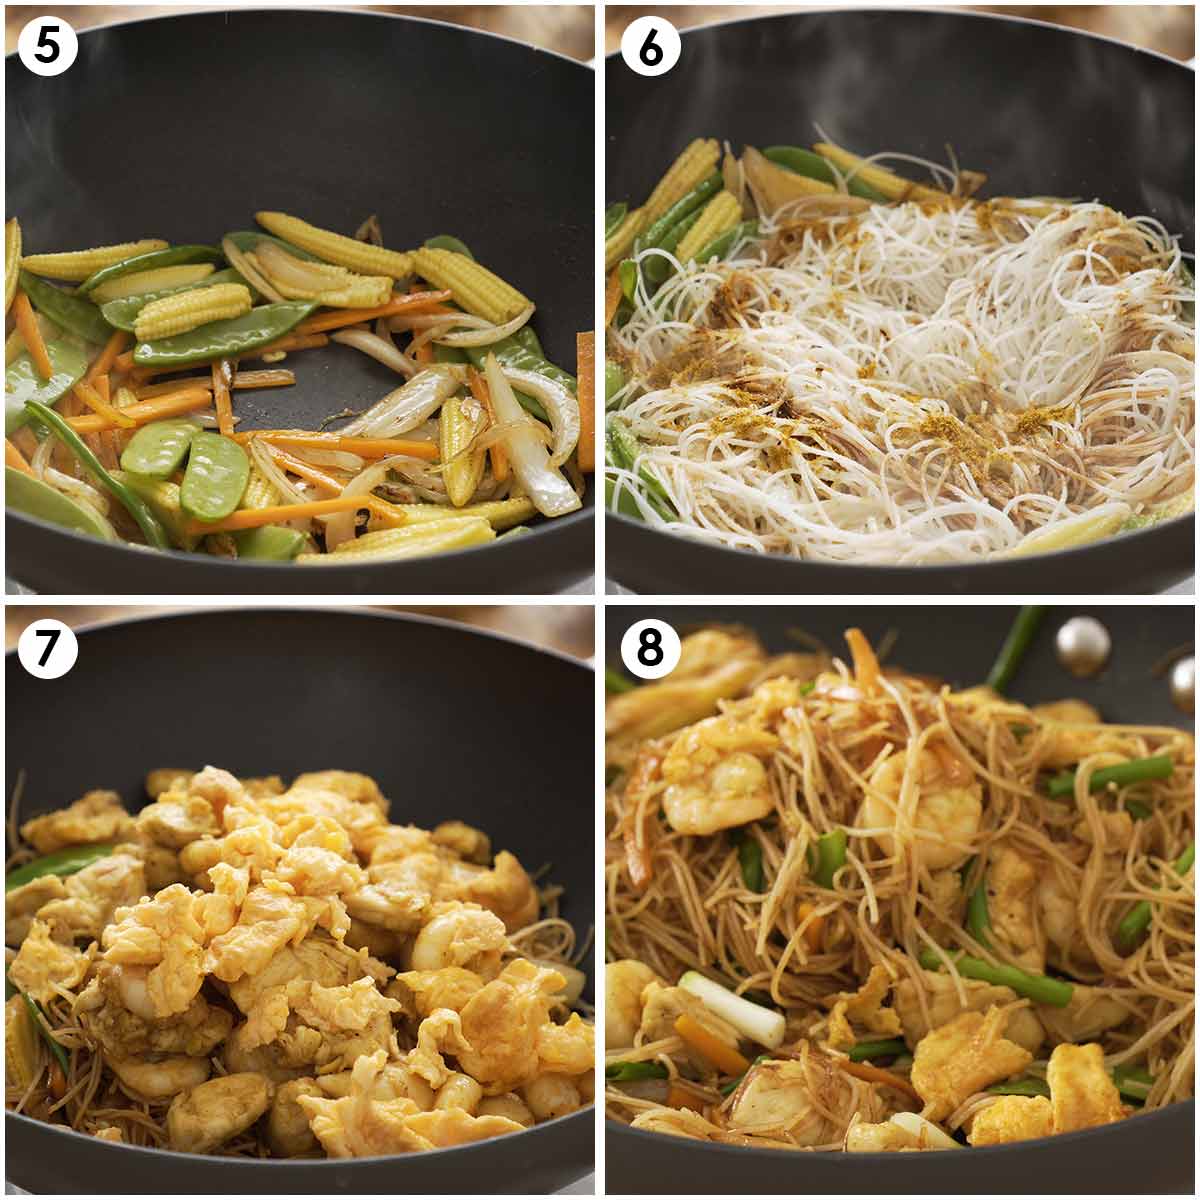 4 image collage showing how to stir fry vegetables, rice noodles, chicken, egg, and prawns.